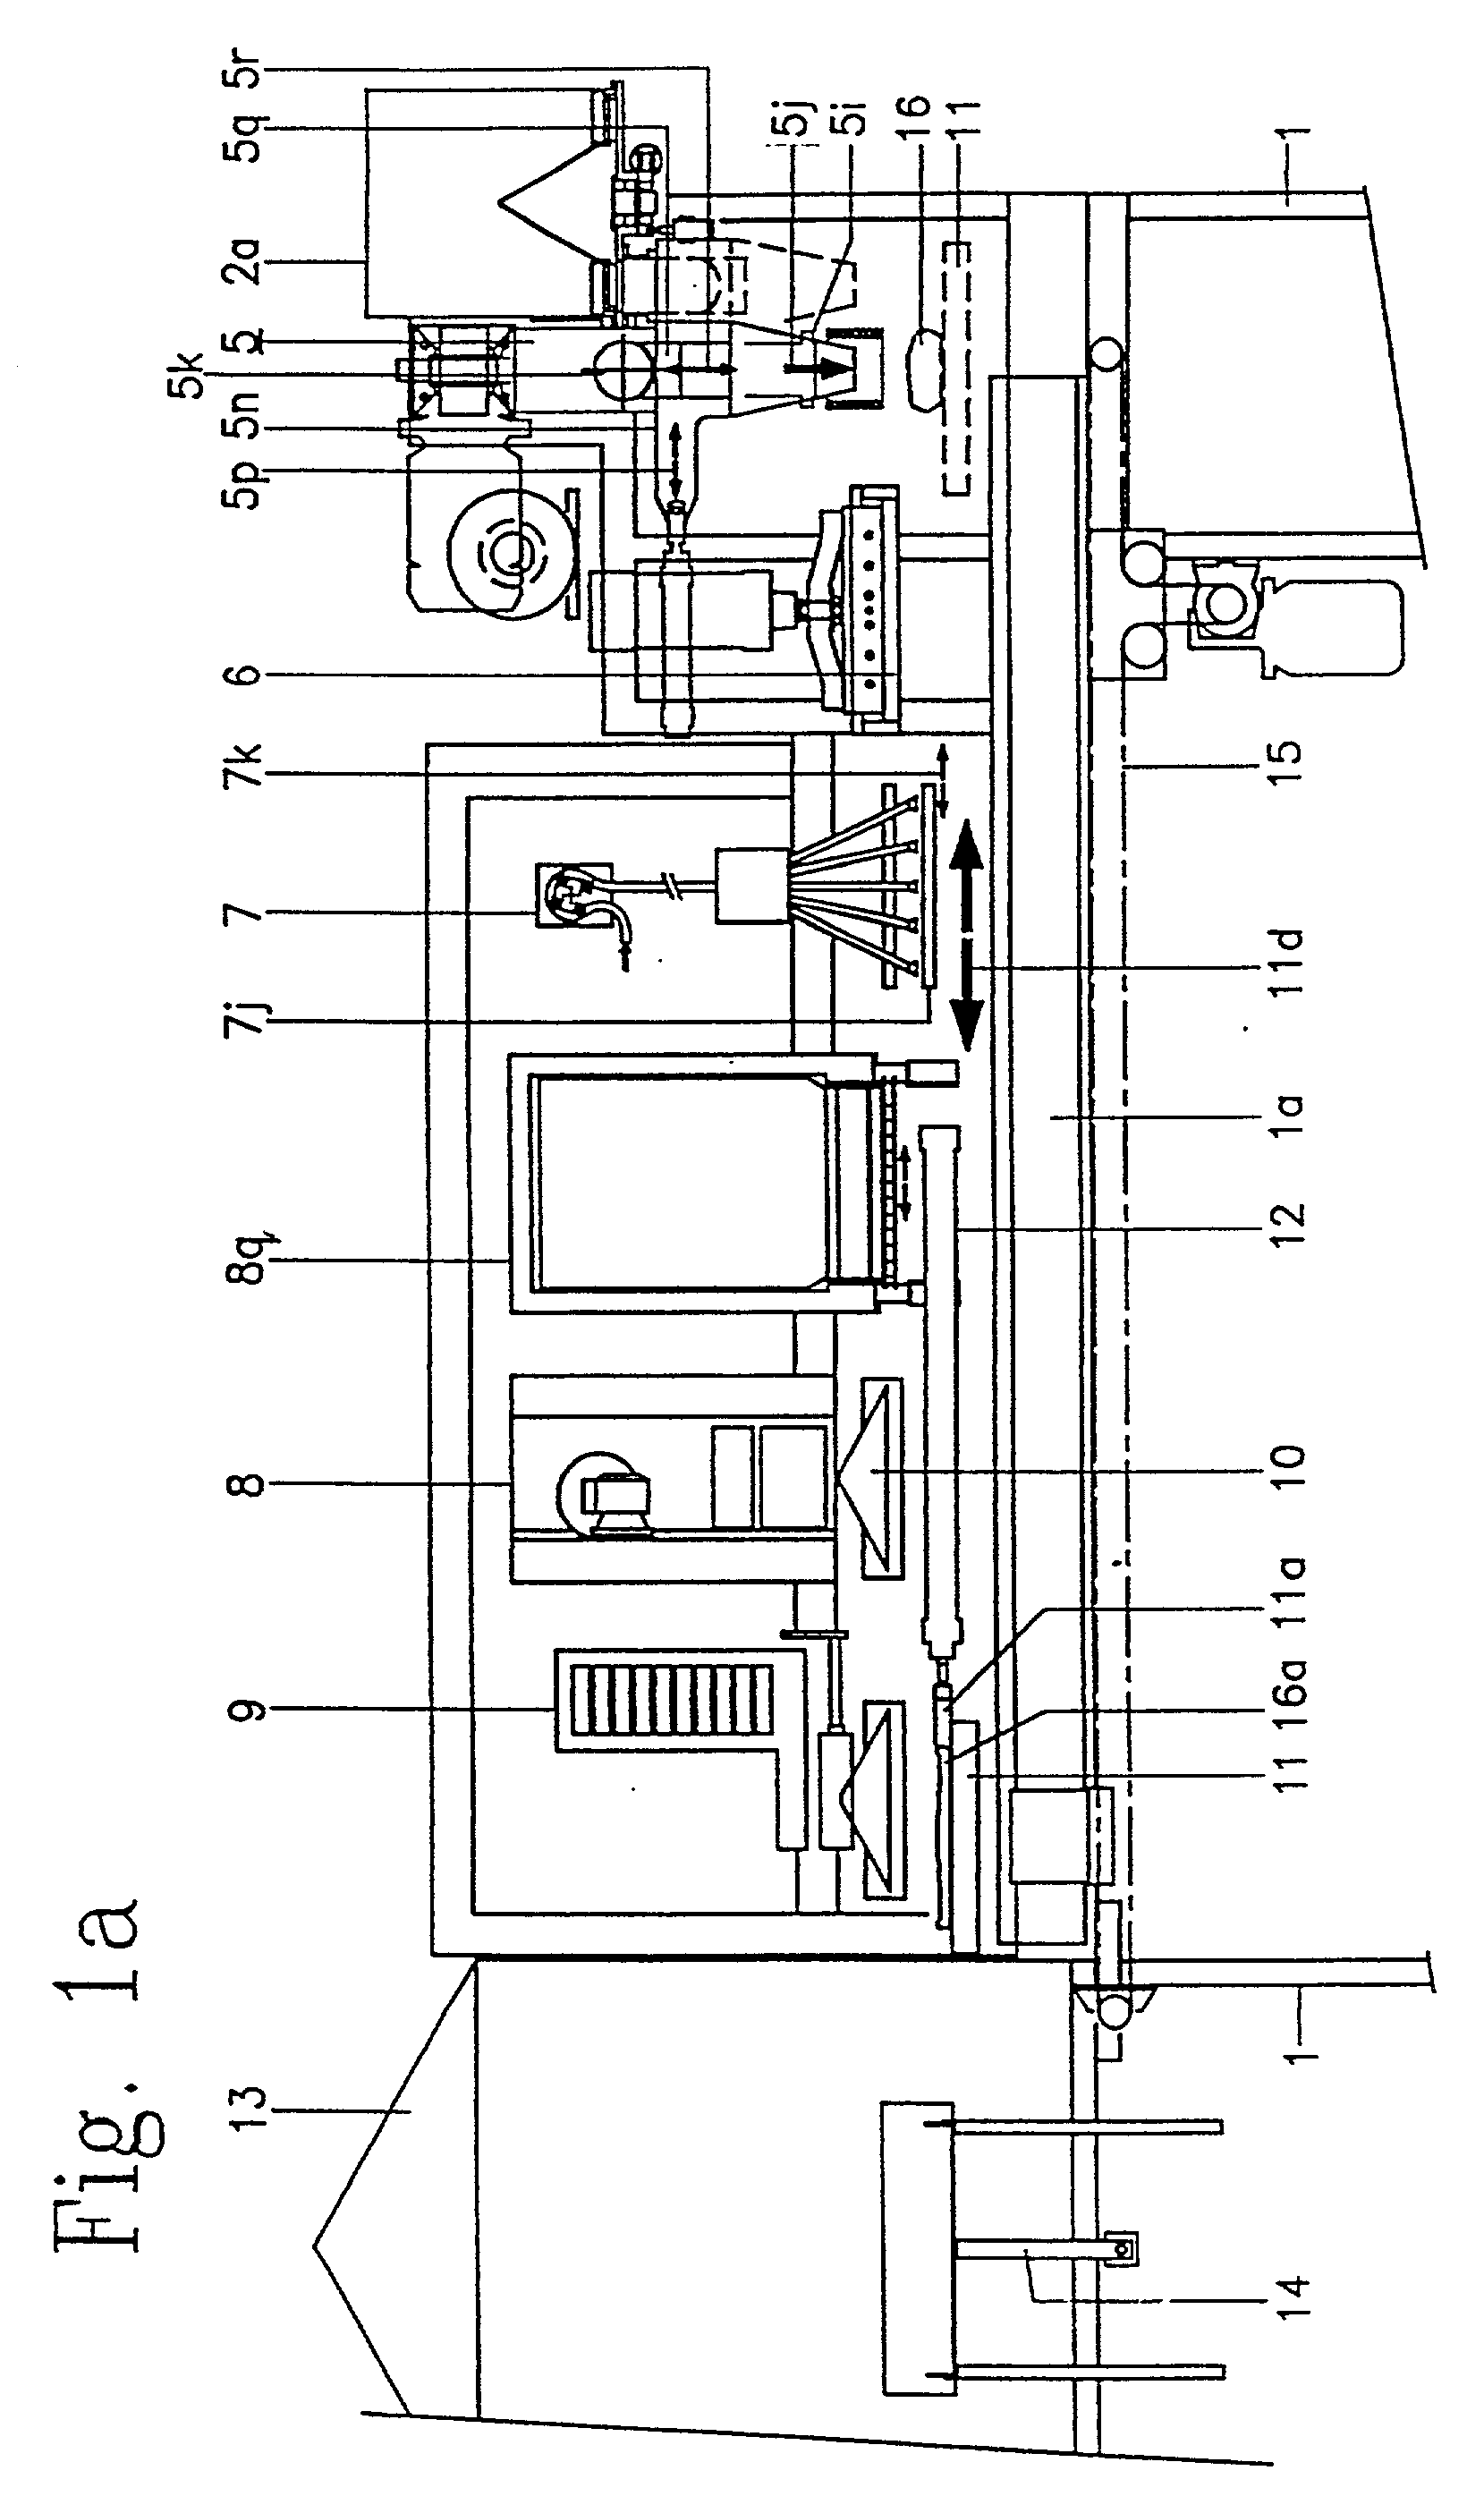 Method and device for producing pizza